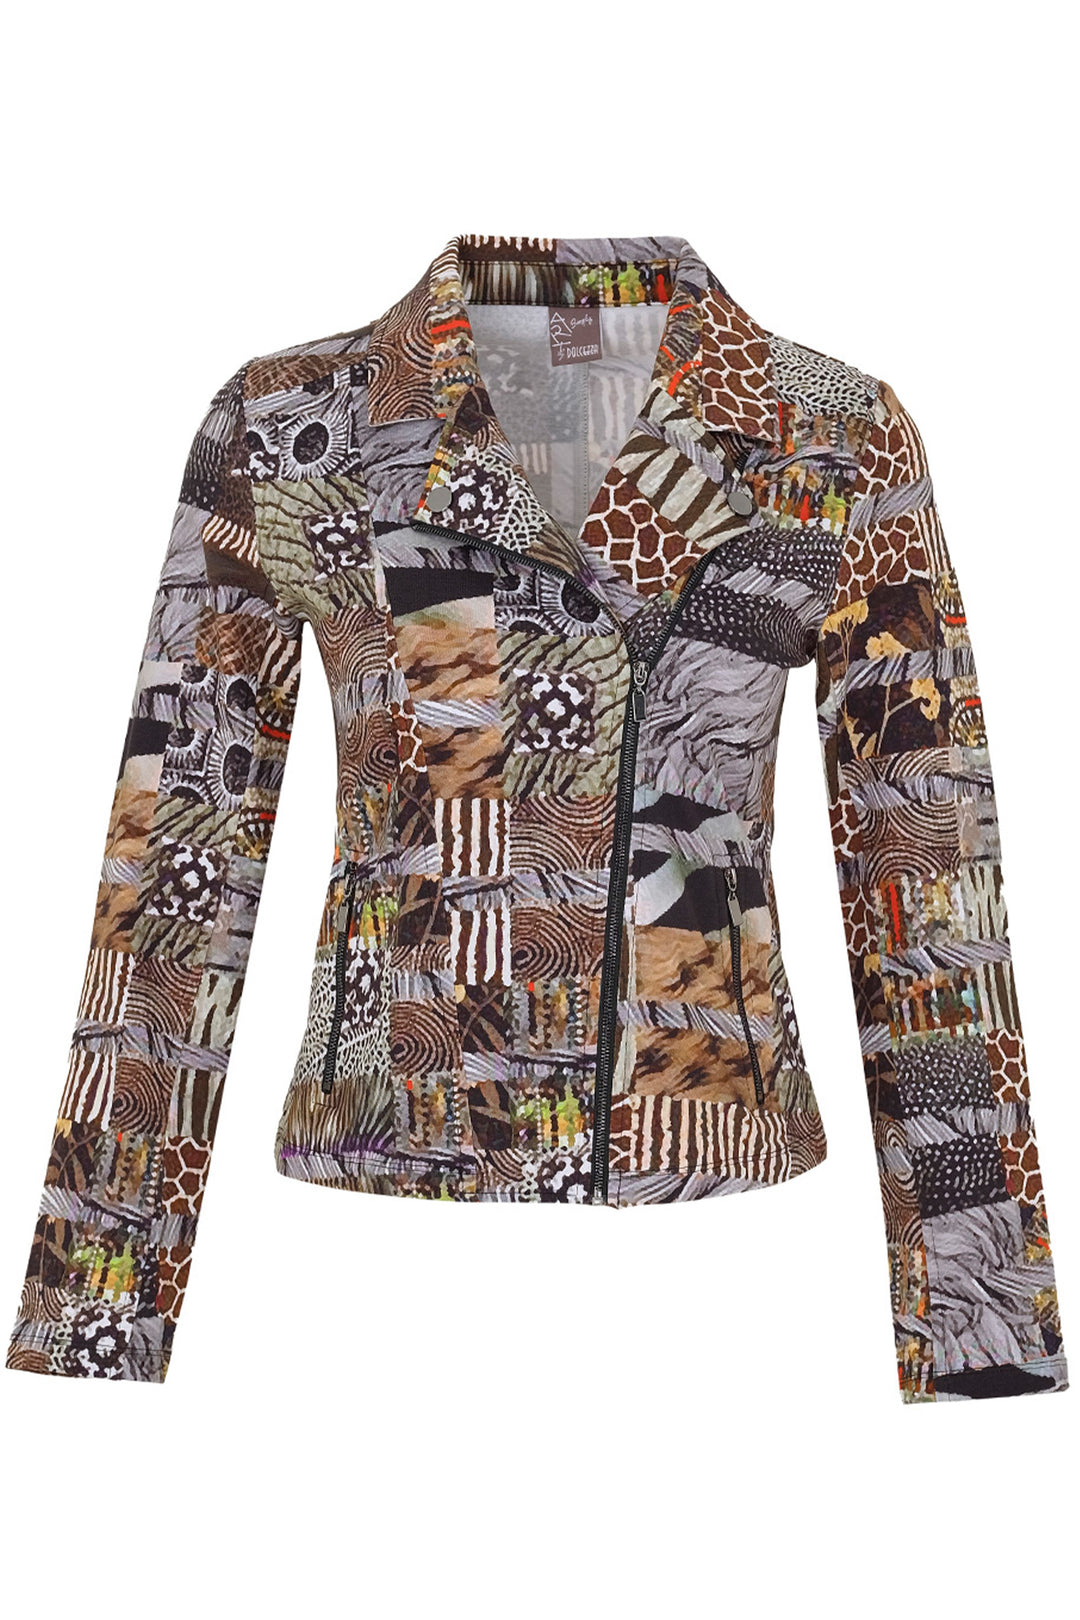 This bold and stylish biker style jacket features a lapel collar, an off-centre front zip-fastening, two front zip pockets, and full length sleeves, all in an eye-catching all-over print. 